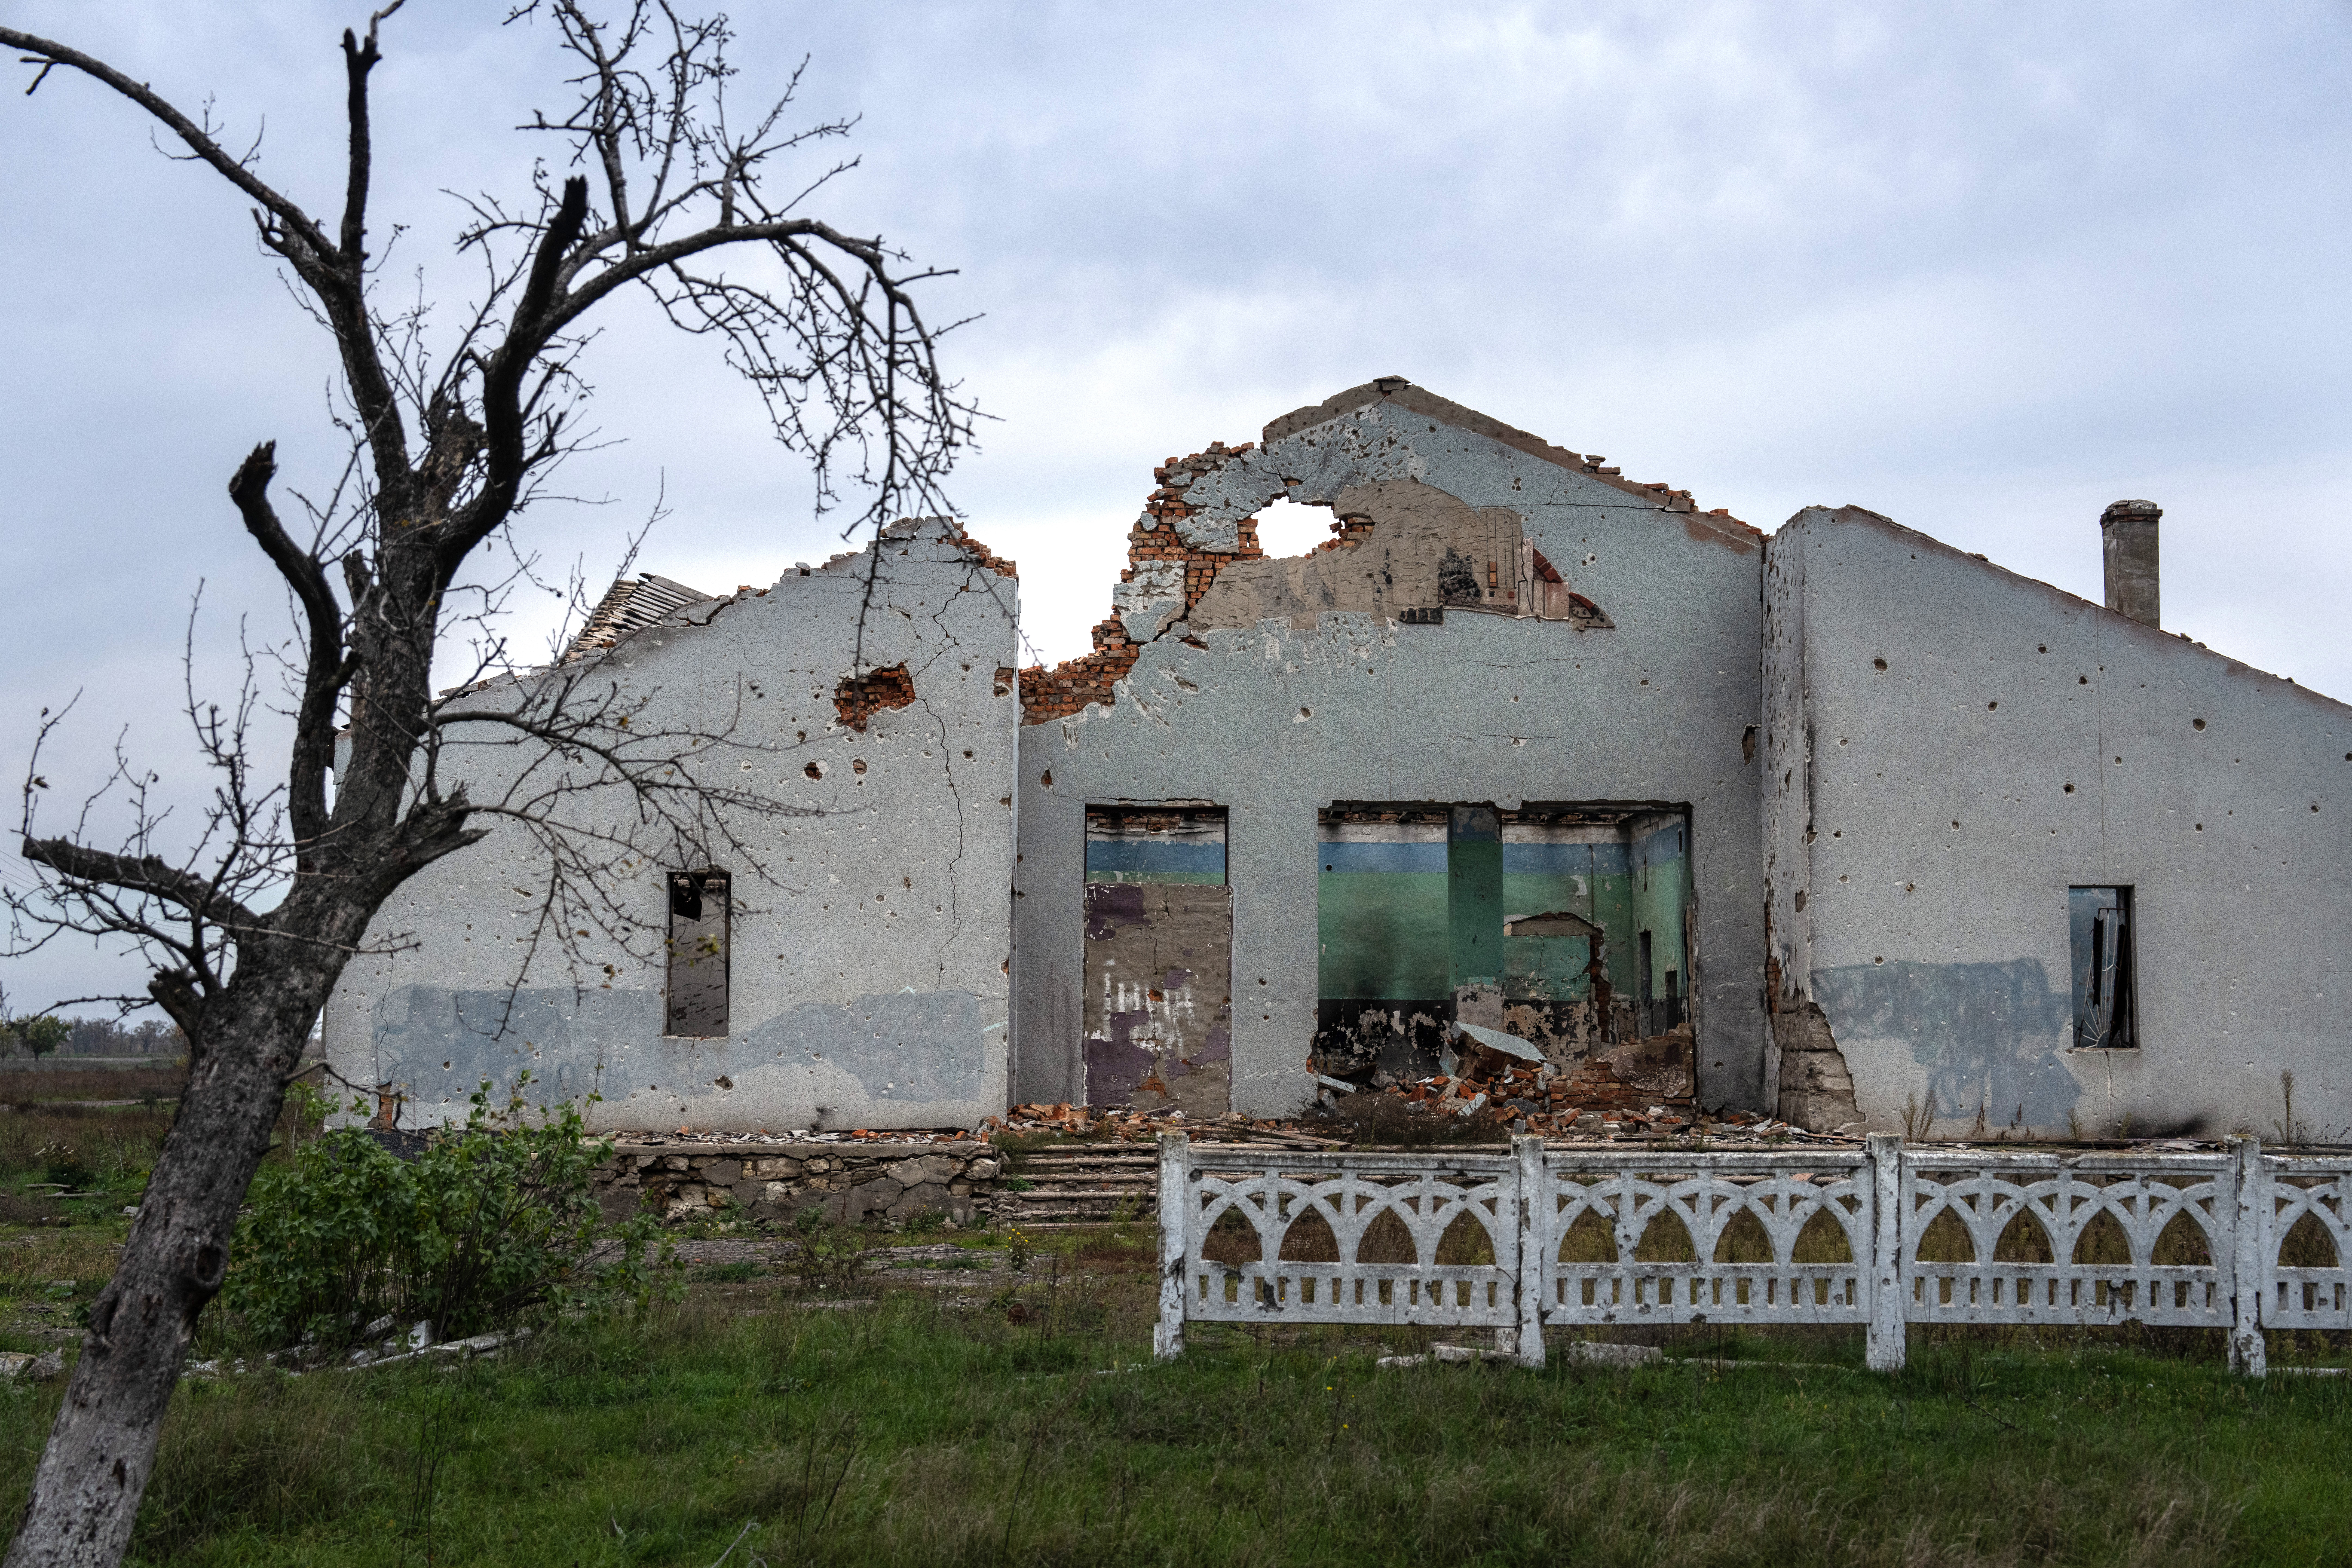 A village hall lies in ruins after being destroyed during fighting between Ukrainian and Russian occupying forces, on October 30, in Kherson, Ukraine.